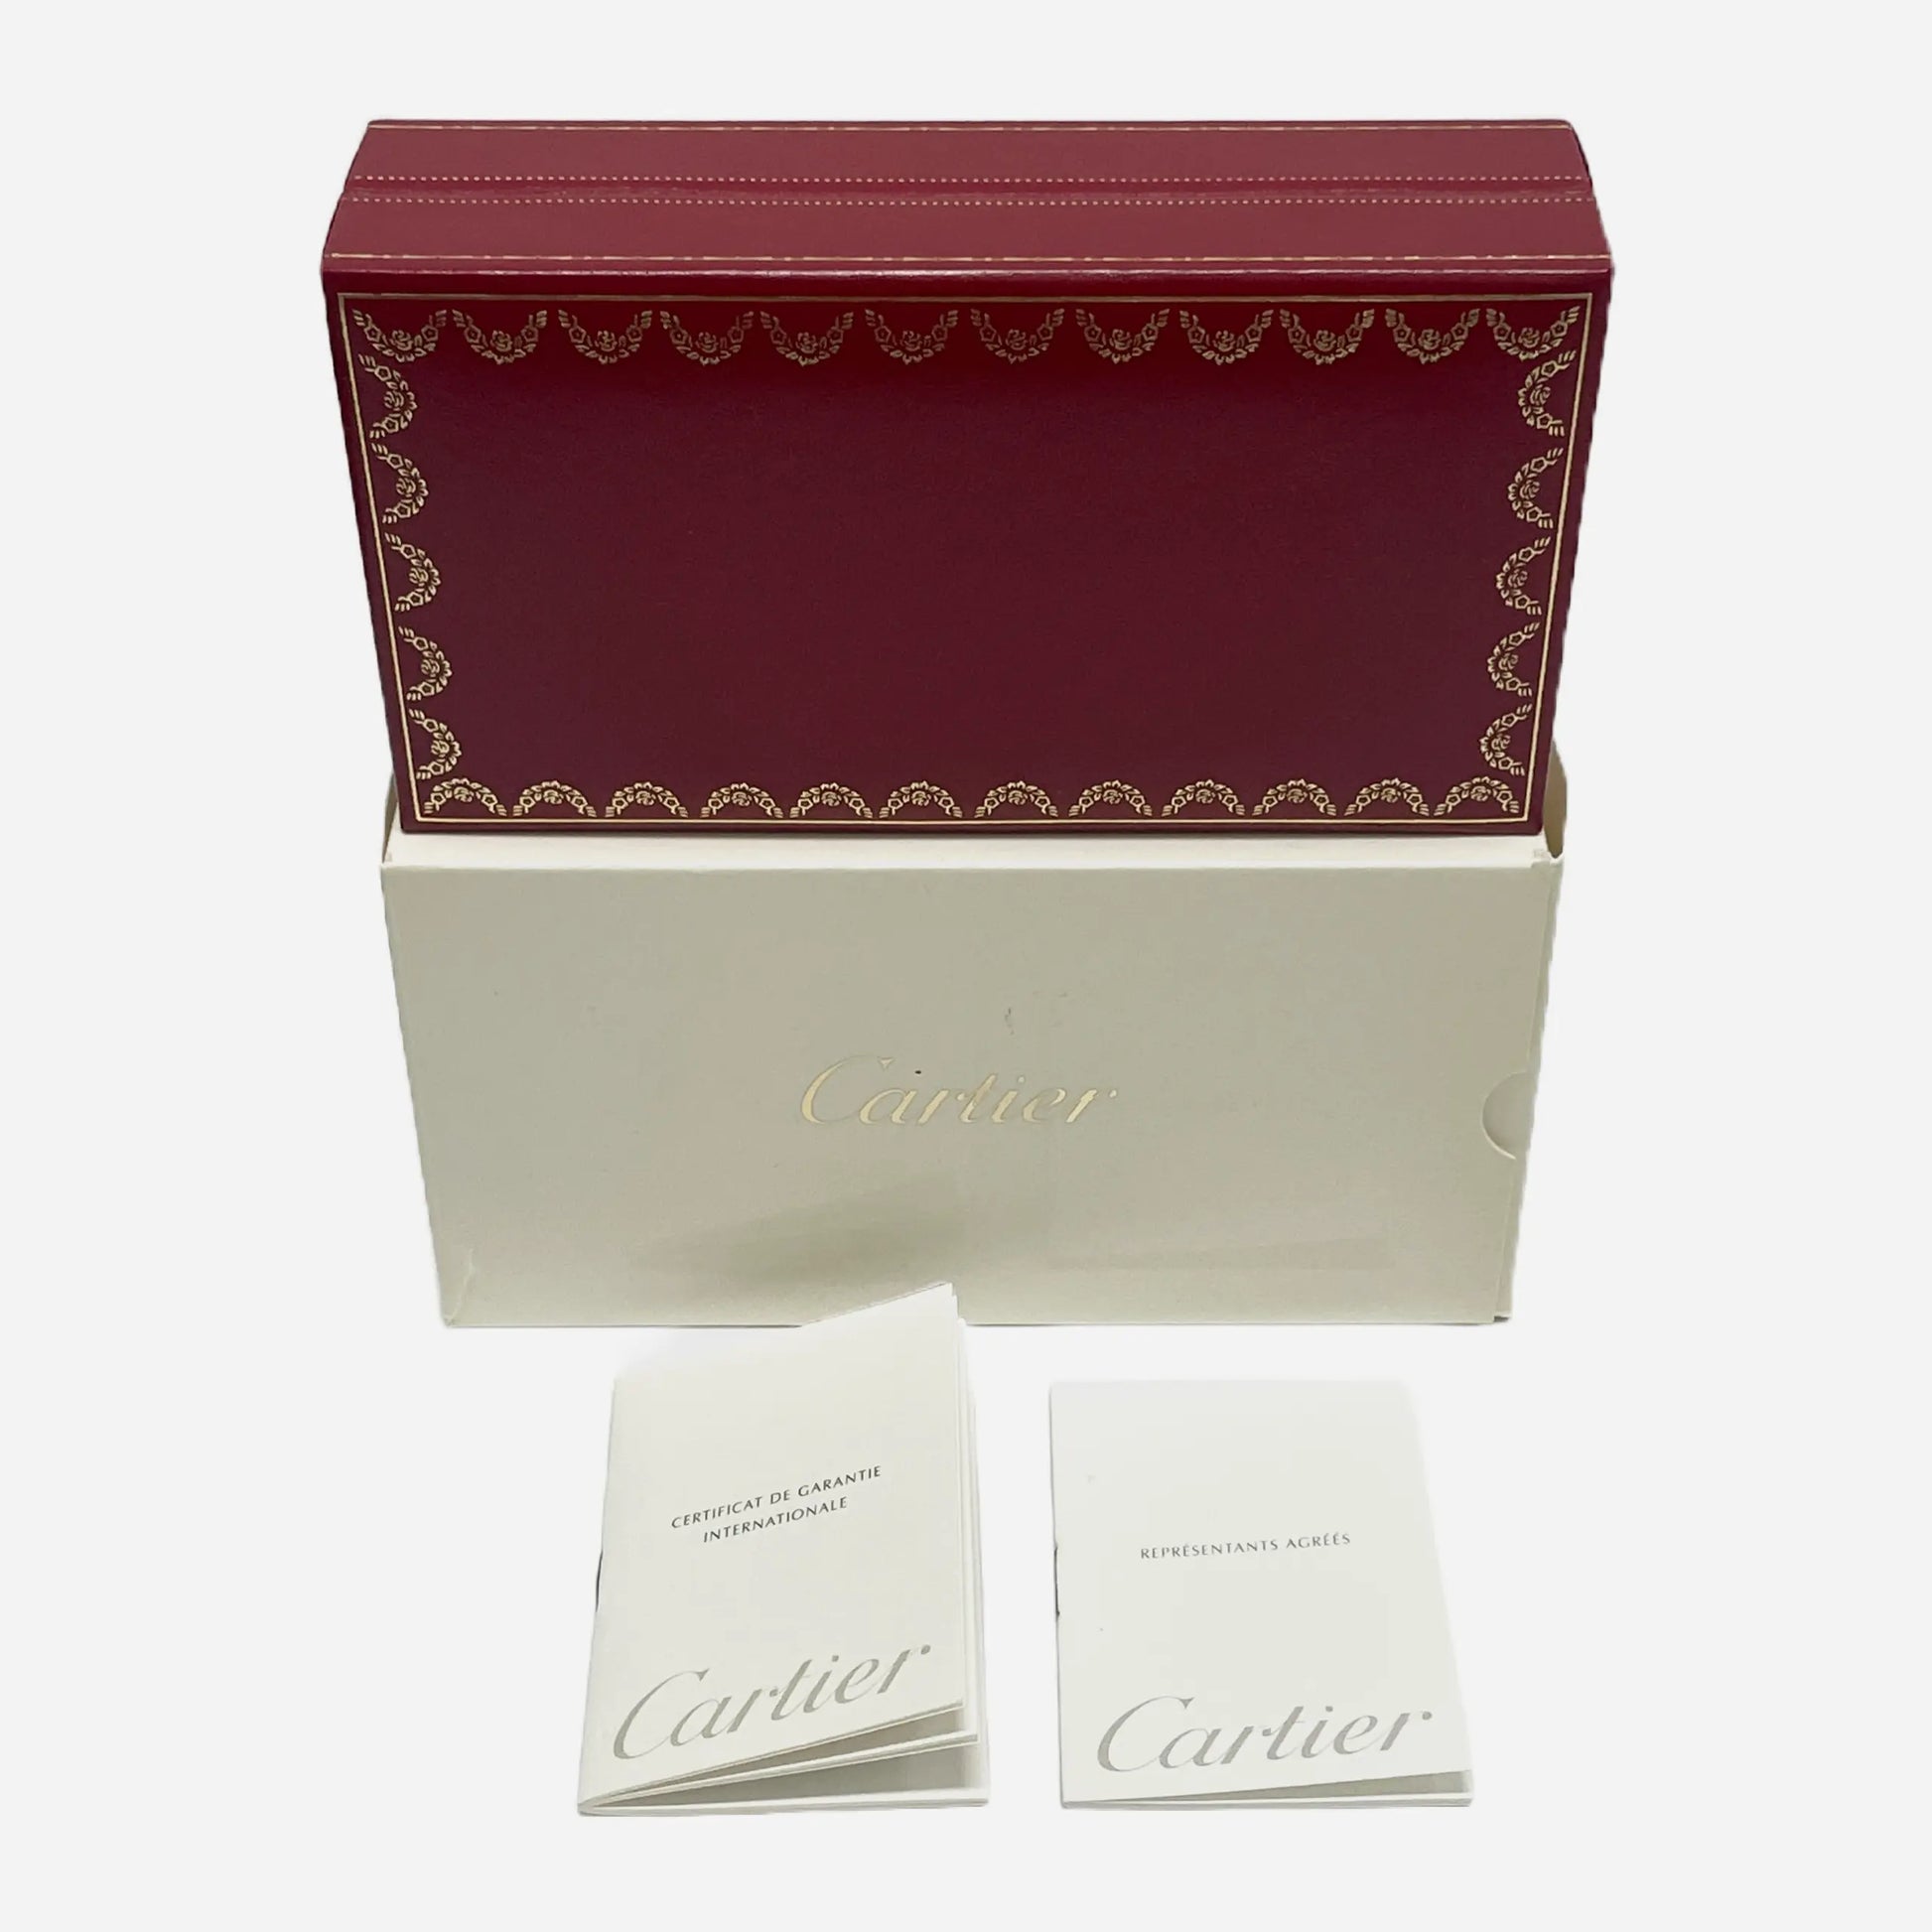 Vintage-Cartier-Ascot-Must-Louis-Sonnenbrille-Sunglasses-22CT-Gold-Plated-Custom-Box-Papers